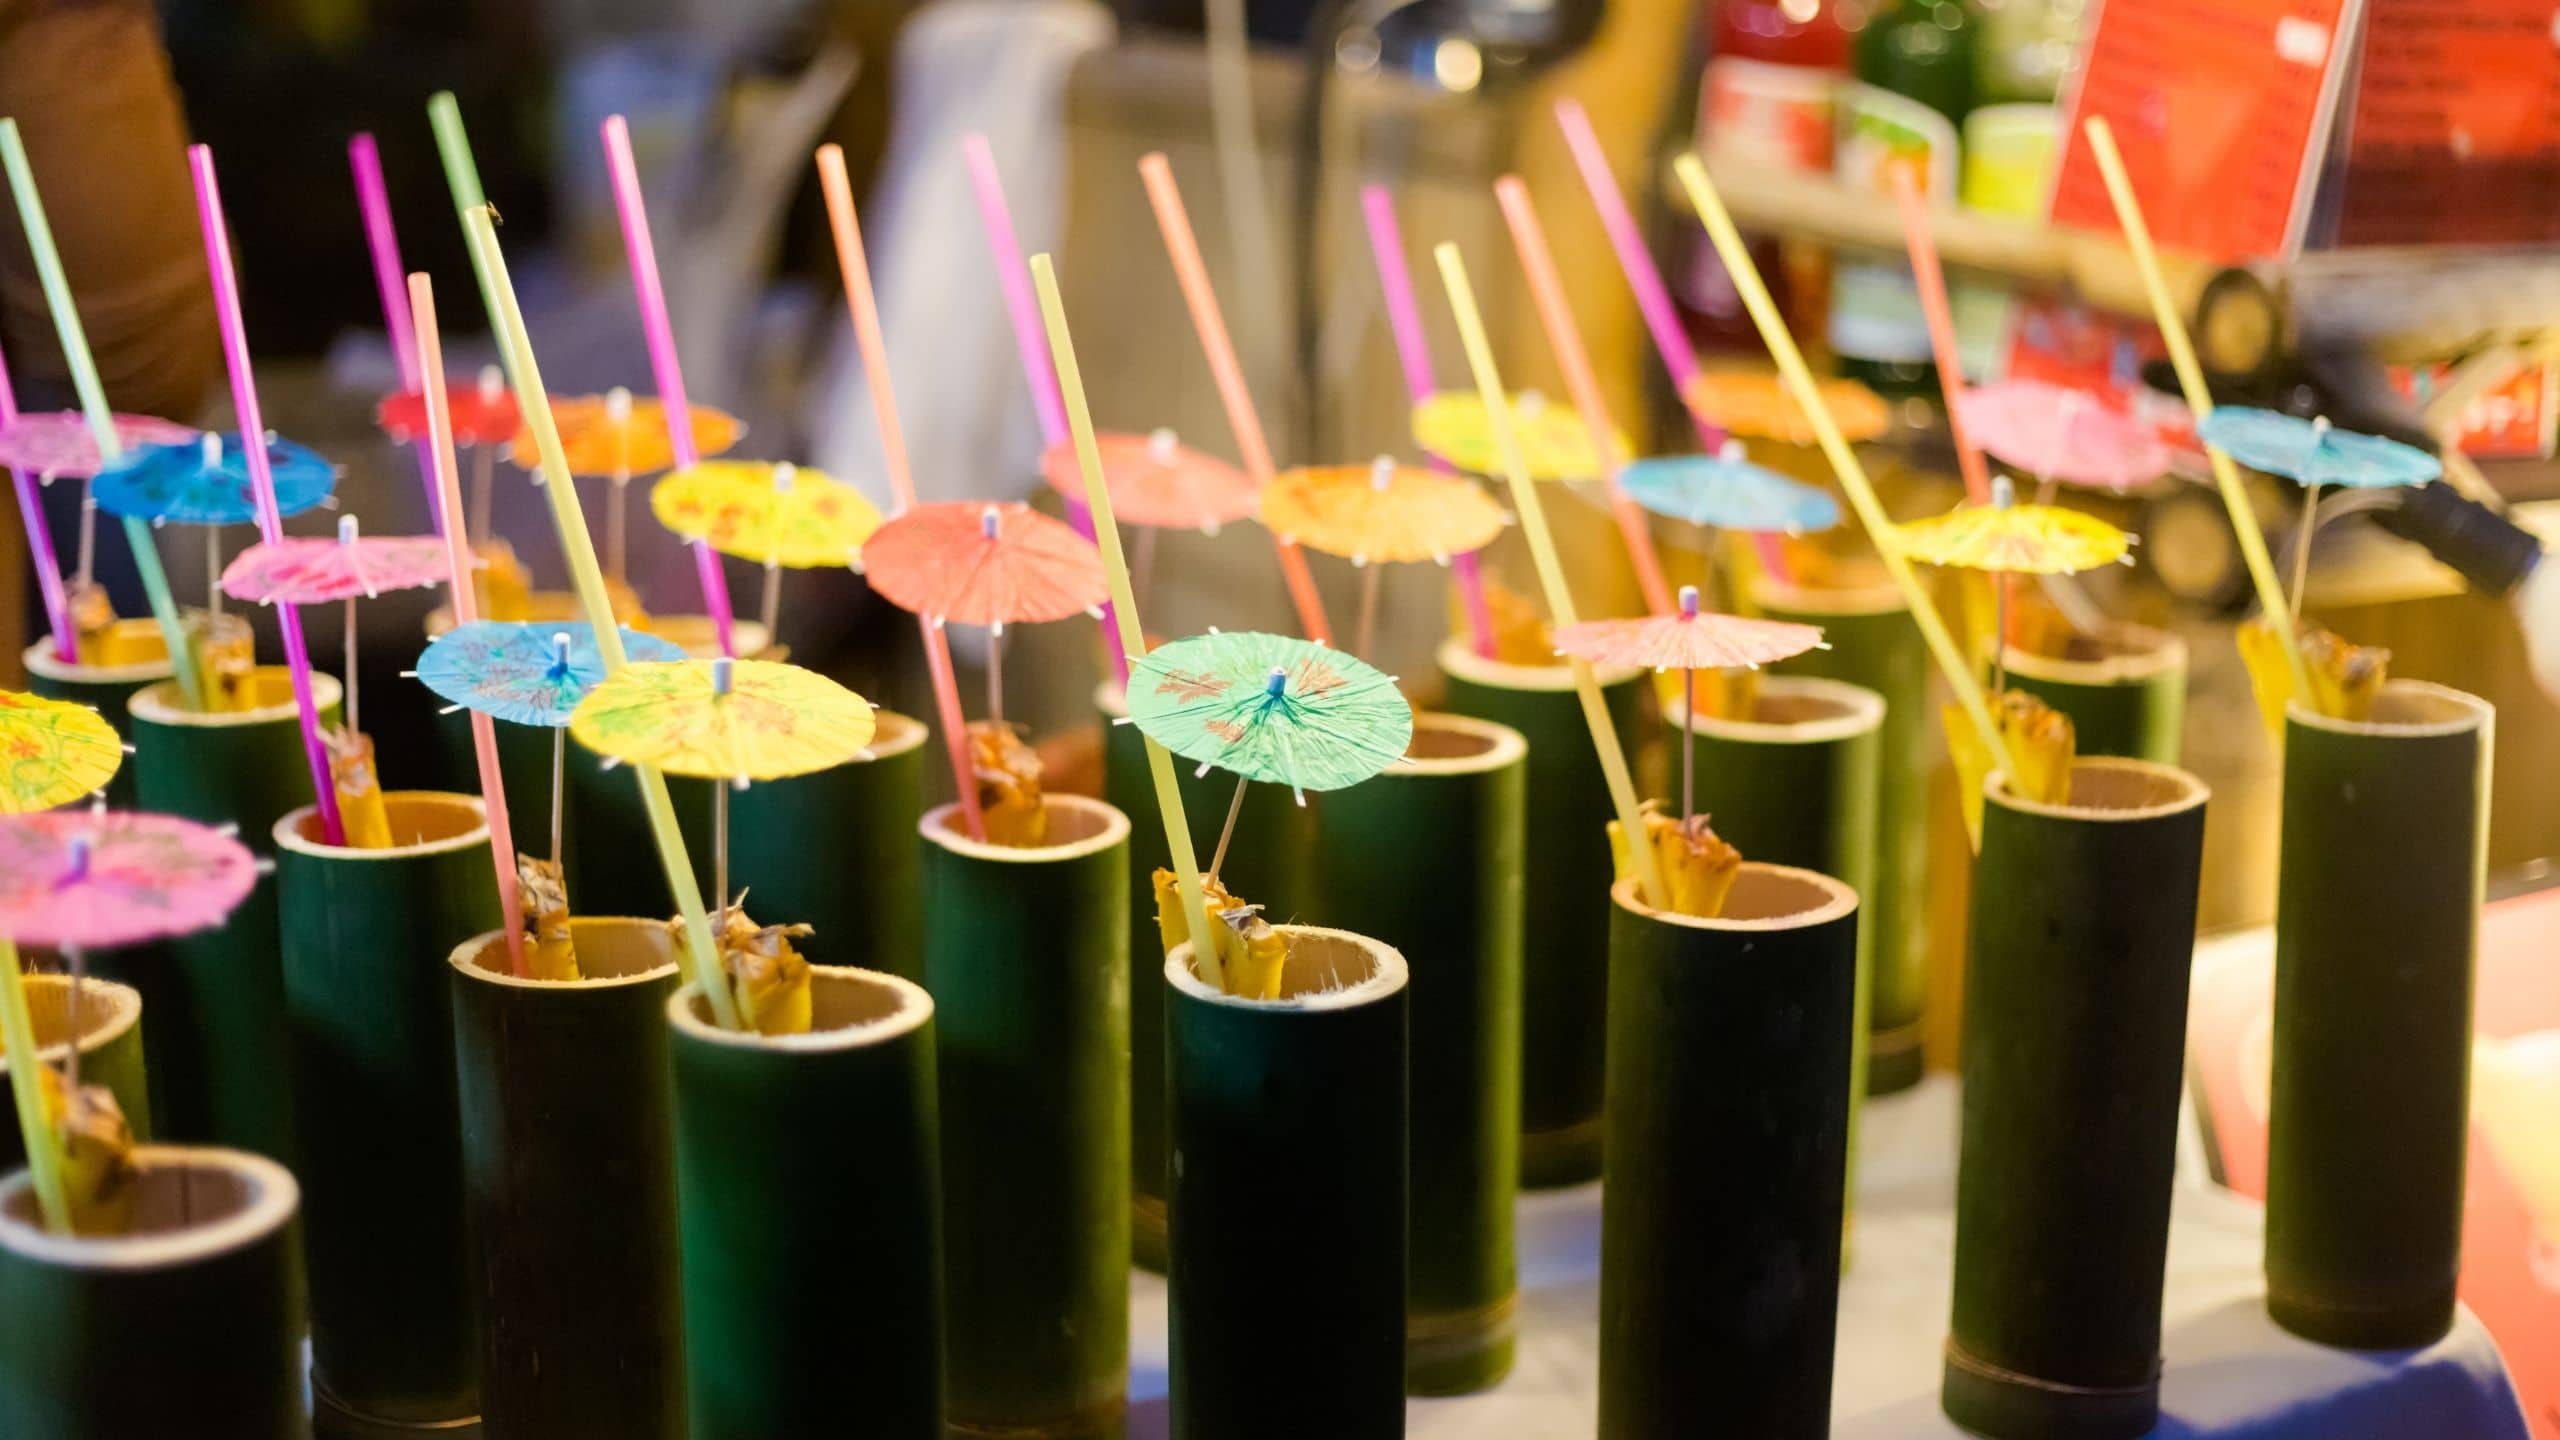 9 Famous Thai Drinks to Quench Your Thirst